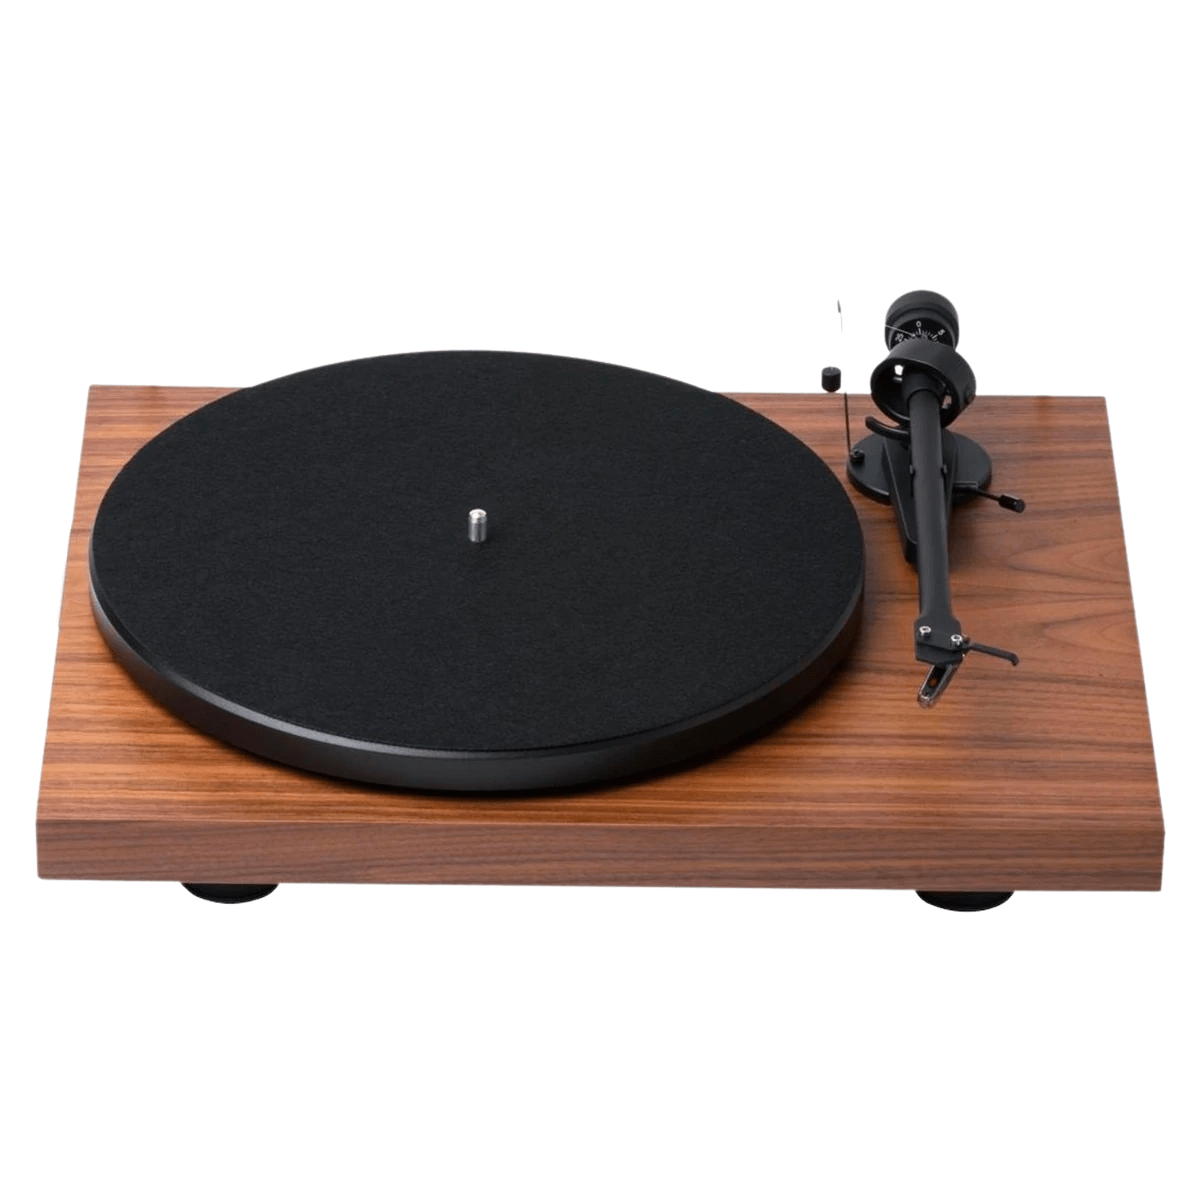 Pro-Ject Debut RecordMaster Turntable with Ortofon OM10 Cartridge